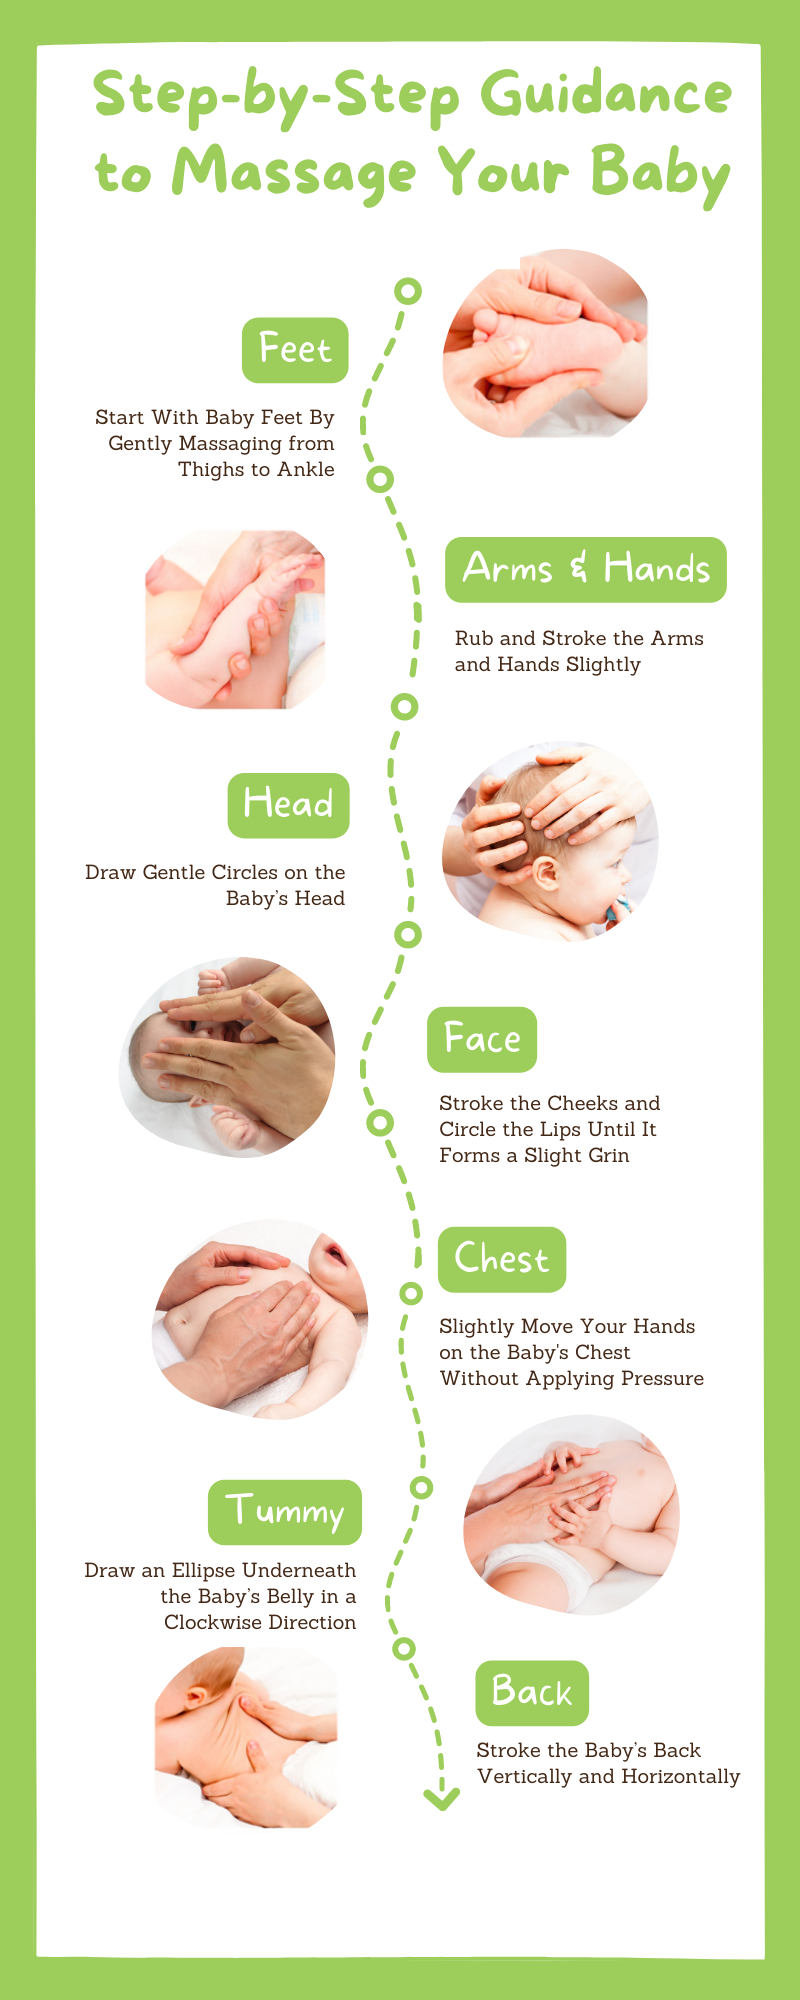 Step by step Guidance to Massage Your Baby